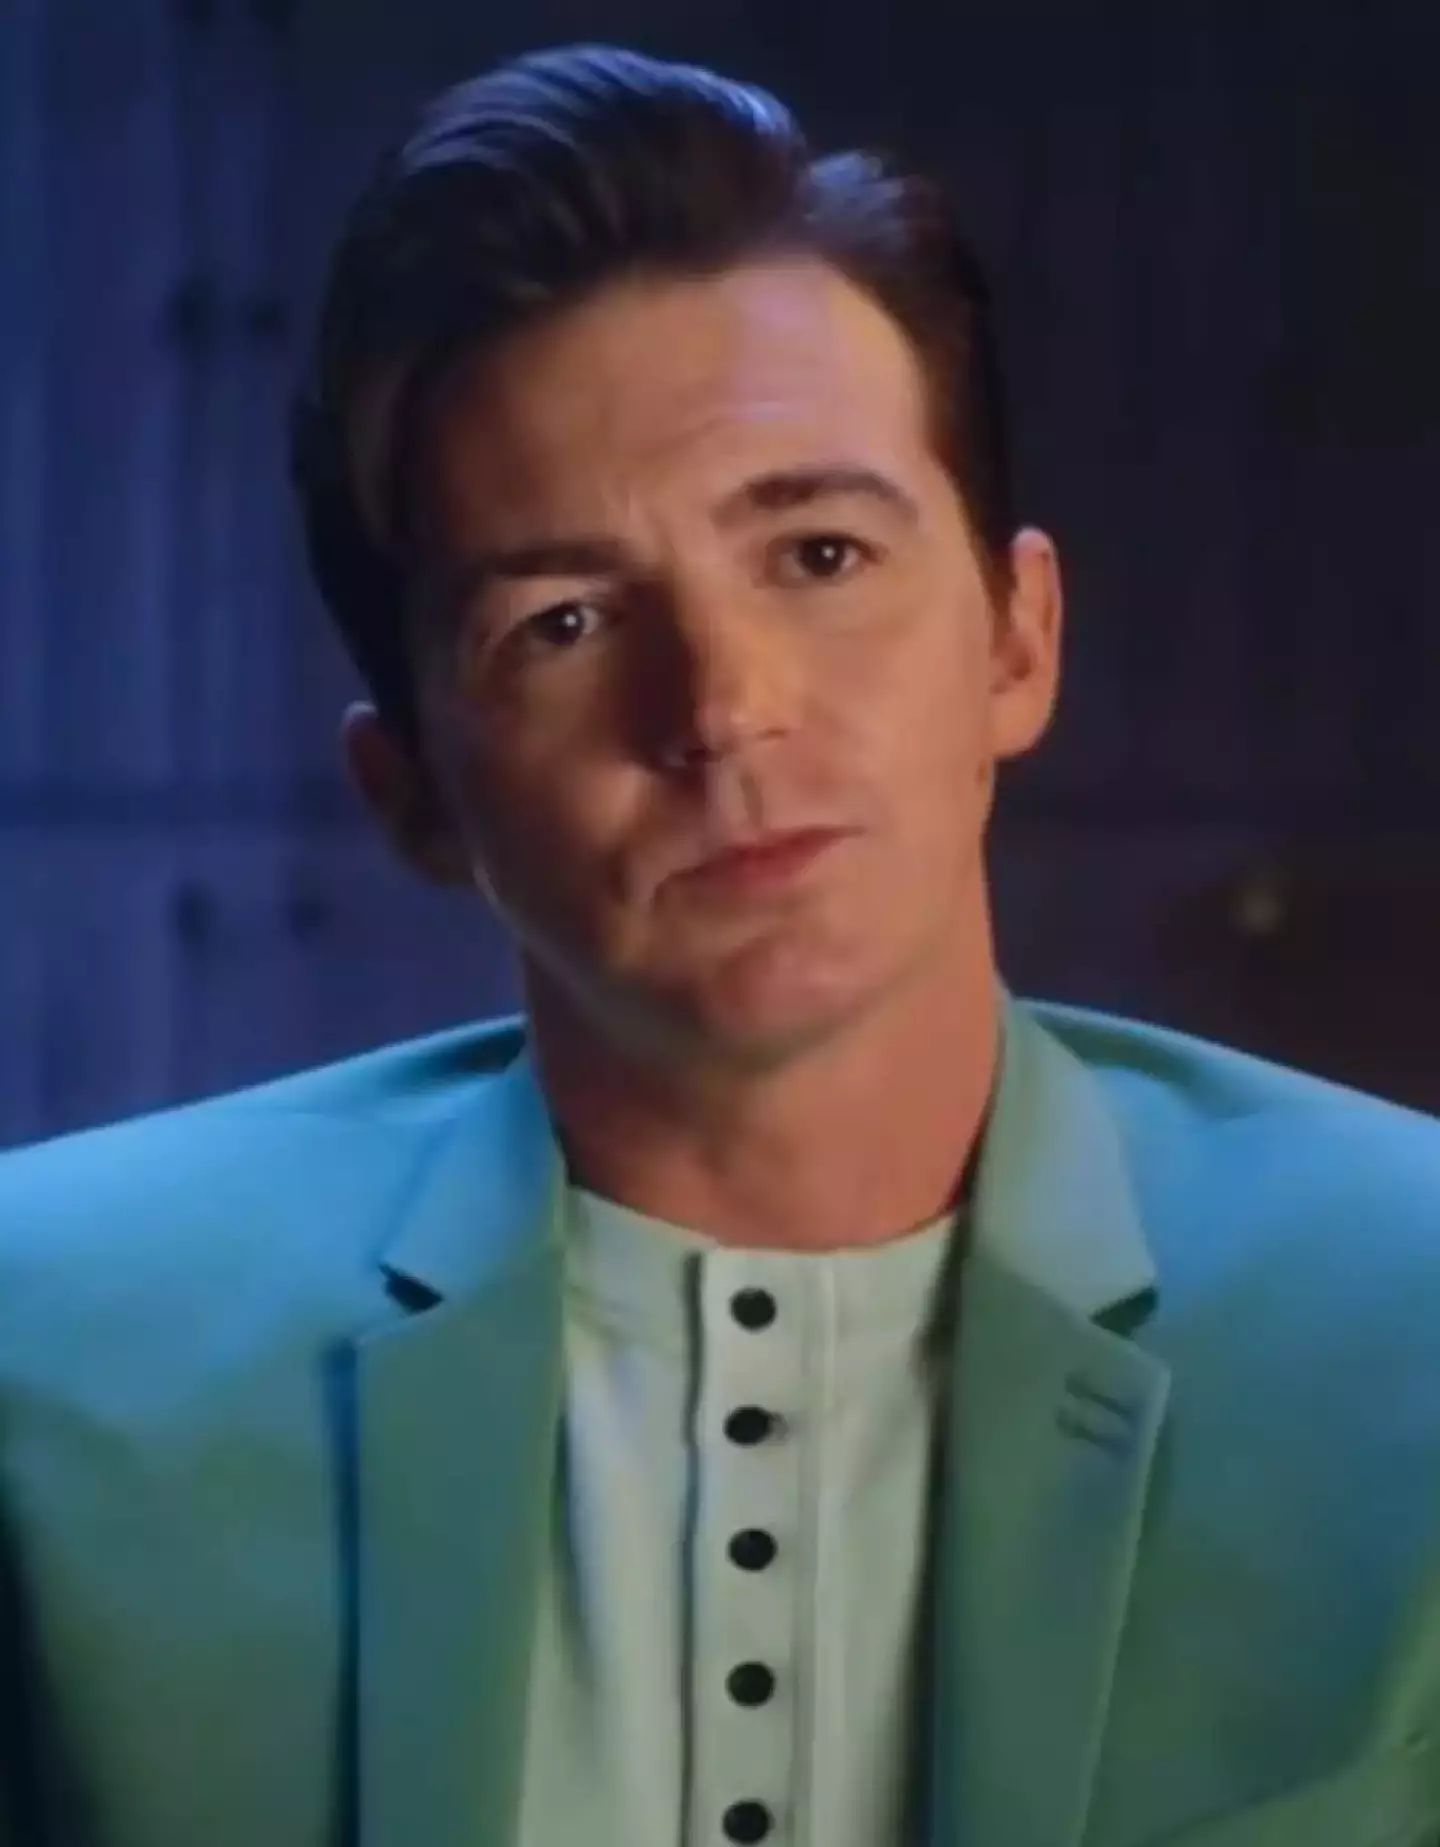 Drake Bell has opened up on the alleged abuse in the new doc.